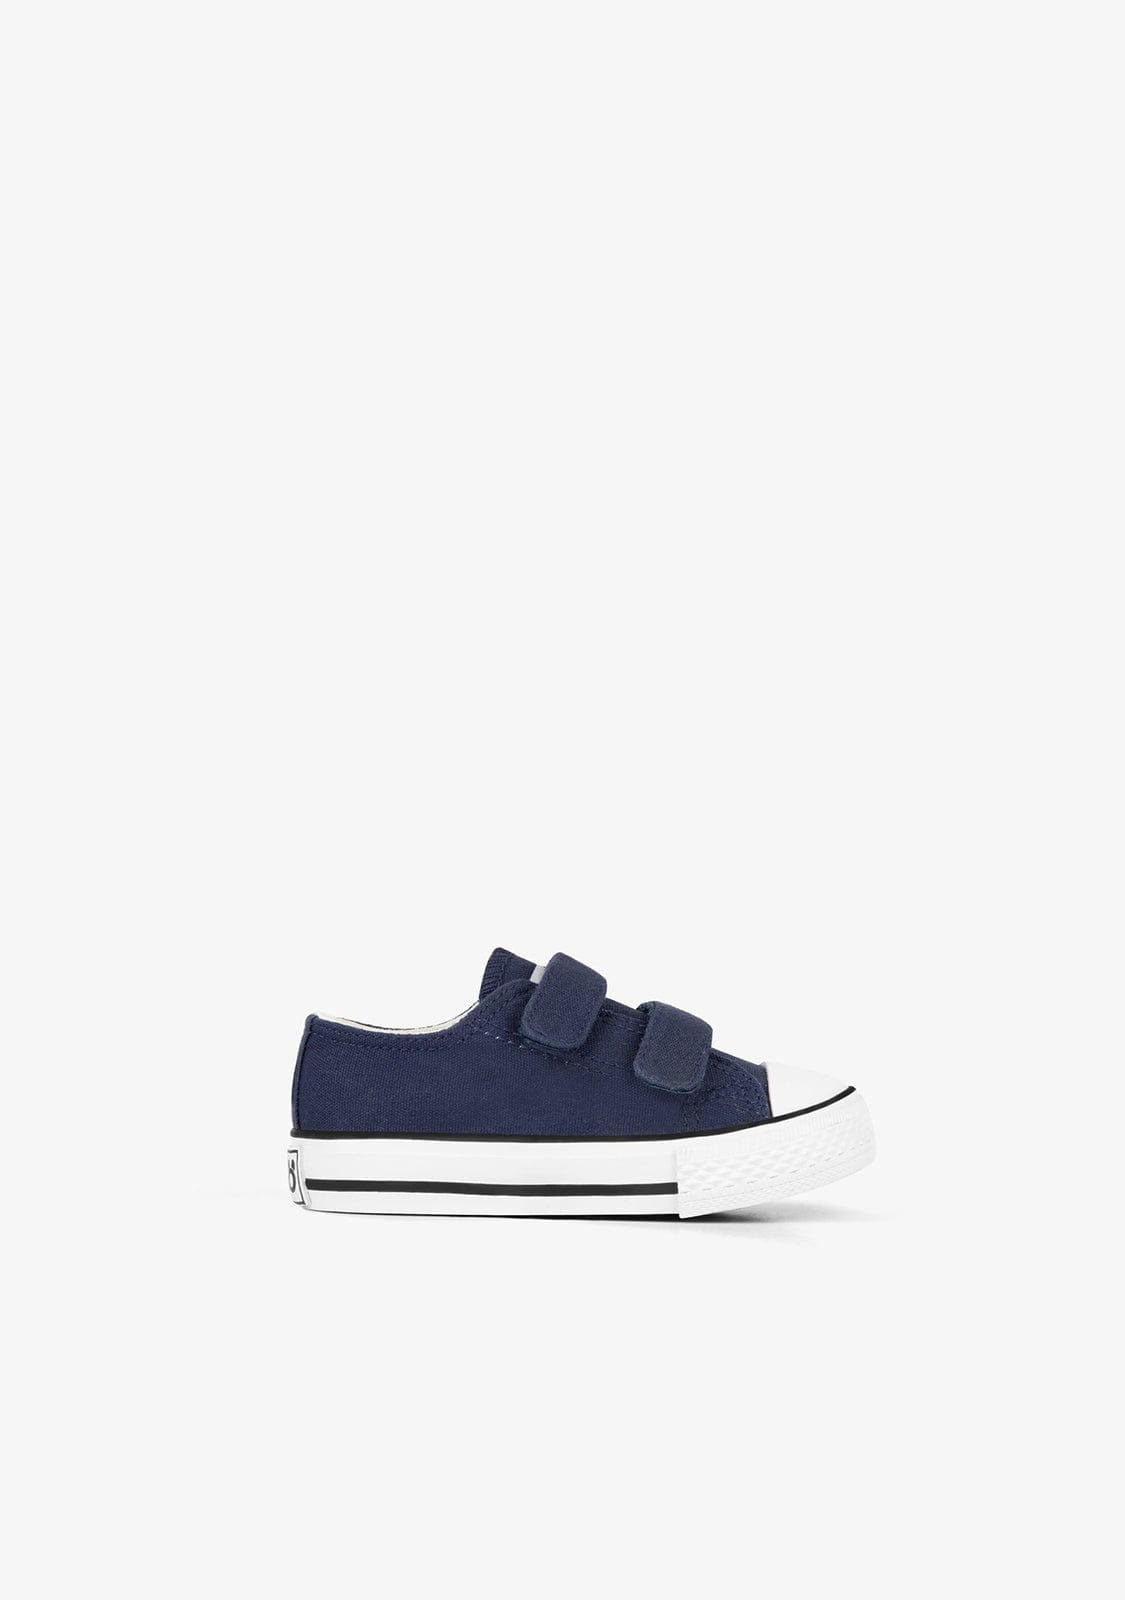 OSITO Shoes Baby's Navy Basic Sneakers Canvas